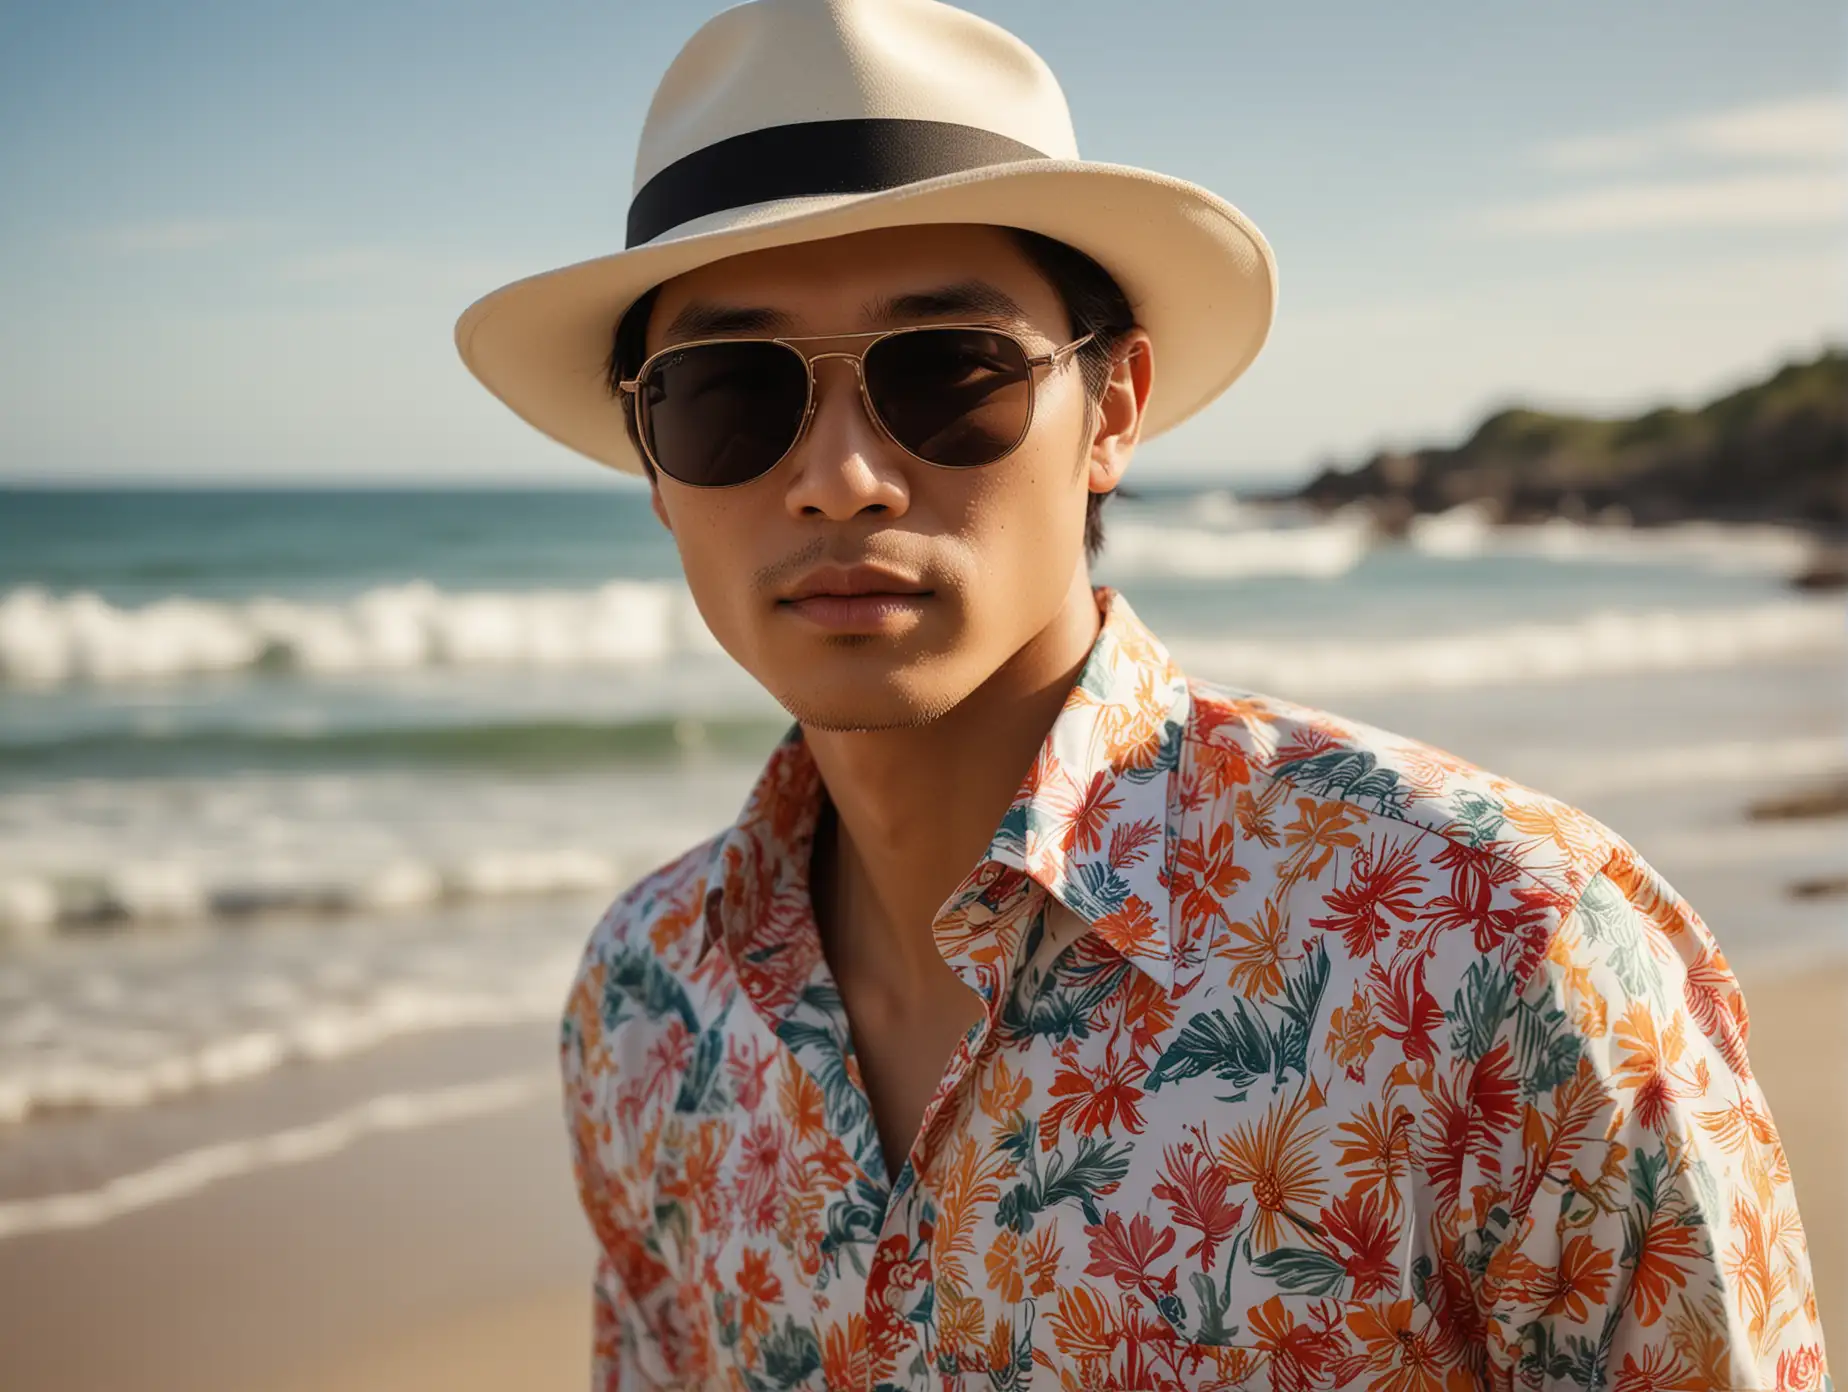 a headshot portrait photograph captivating composition inspired by Annie Leibovitz's iconic style, showcasing a young asian man wears white fedora hat, beach hawai-motive colorful shirt, walking gracefully on the sandy shores of a sun-drenched beach. With the Sigma 85mm 1.4F lens, capture him delicately holding his sunglasses with his fingers, adding an element of contemplation to the scene against the backdrop of the serene ocean waves.